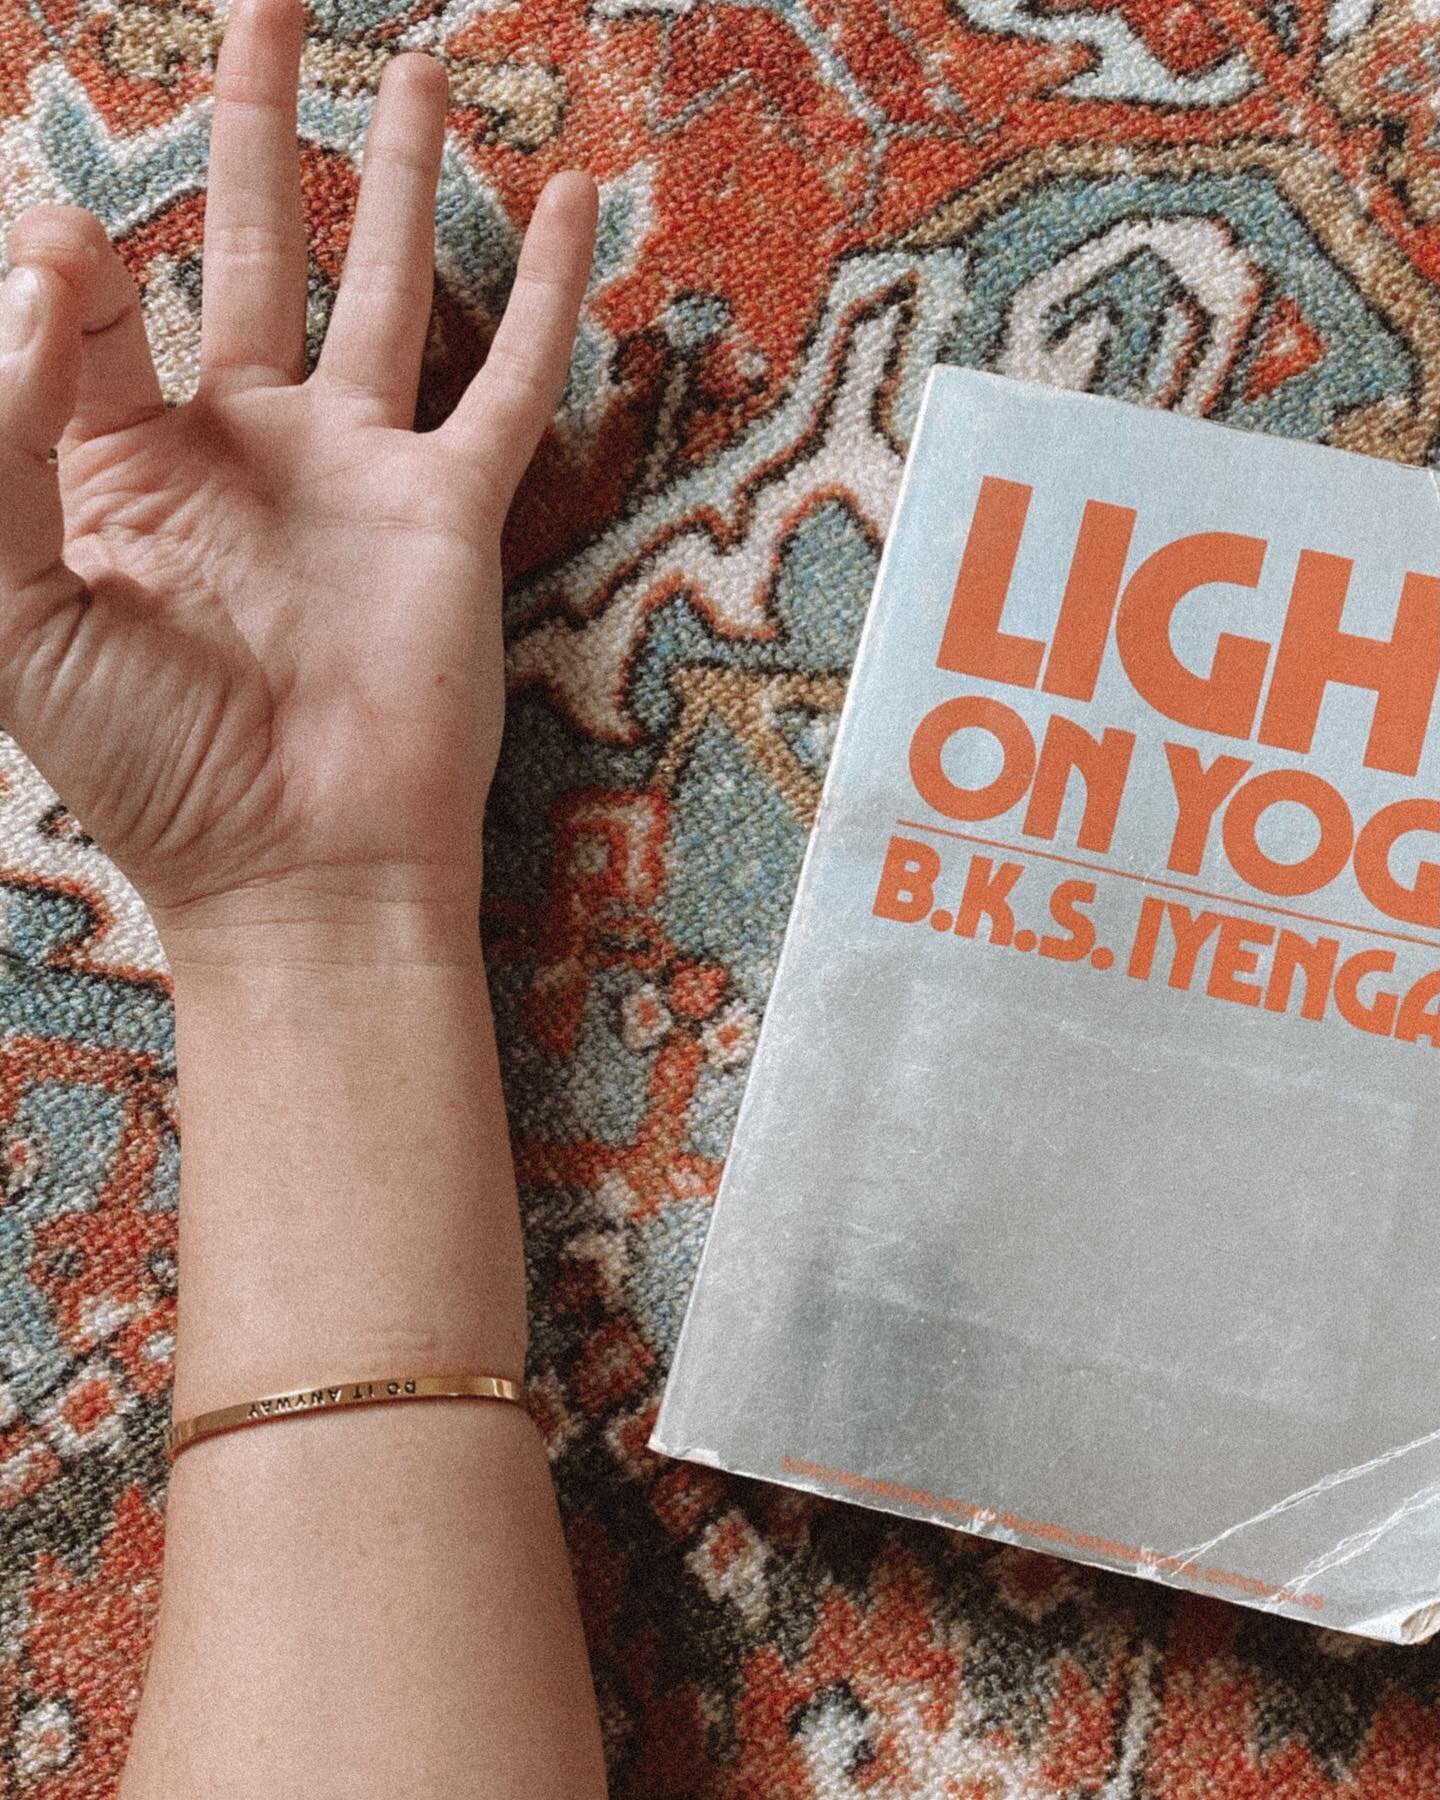 I love my vintage edition of Light on Yoga ☺️ 
It&rsquo;s a must have for any teacher trainings, and it&rsquo;s a required reading in my trainings! Along with The Yoga Sutras and Leslie Kaminoff&rsquo;s Yoga Anatomy. What&rsquo;s your favorite book?
